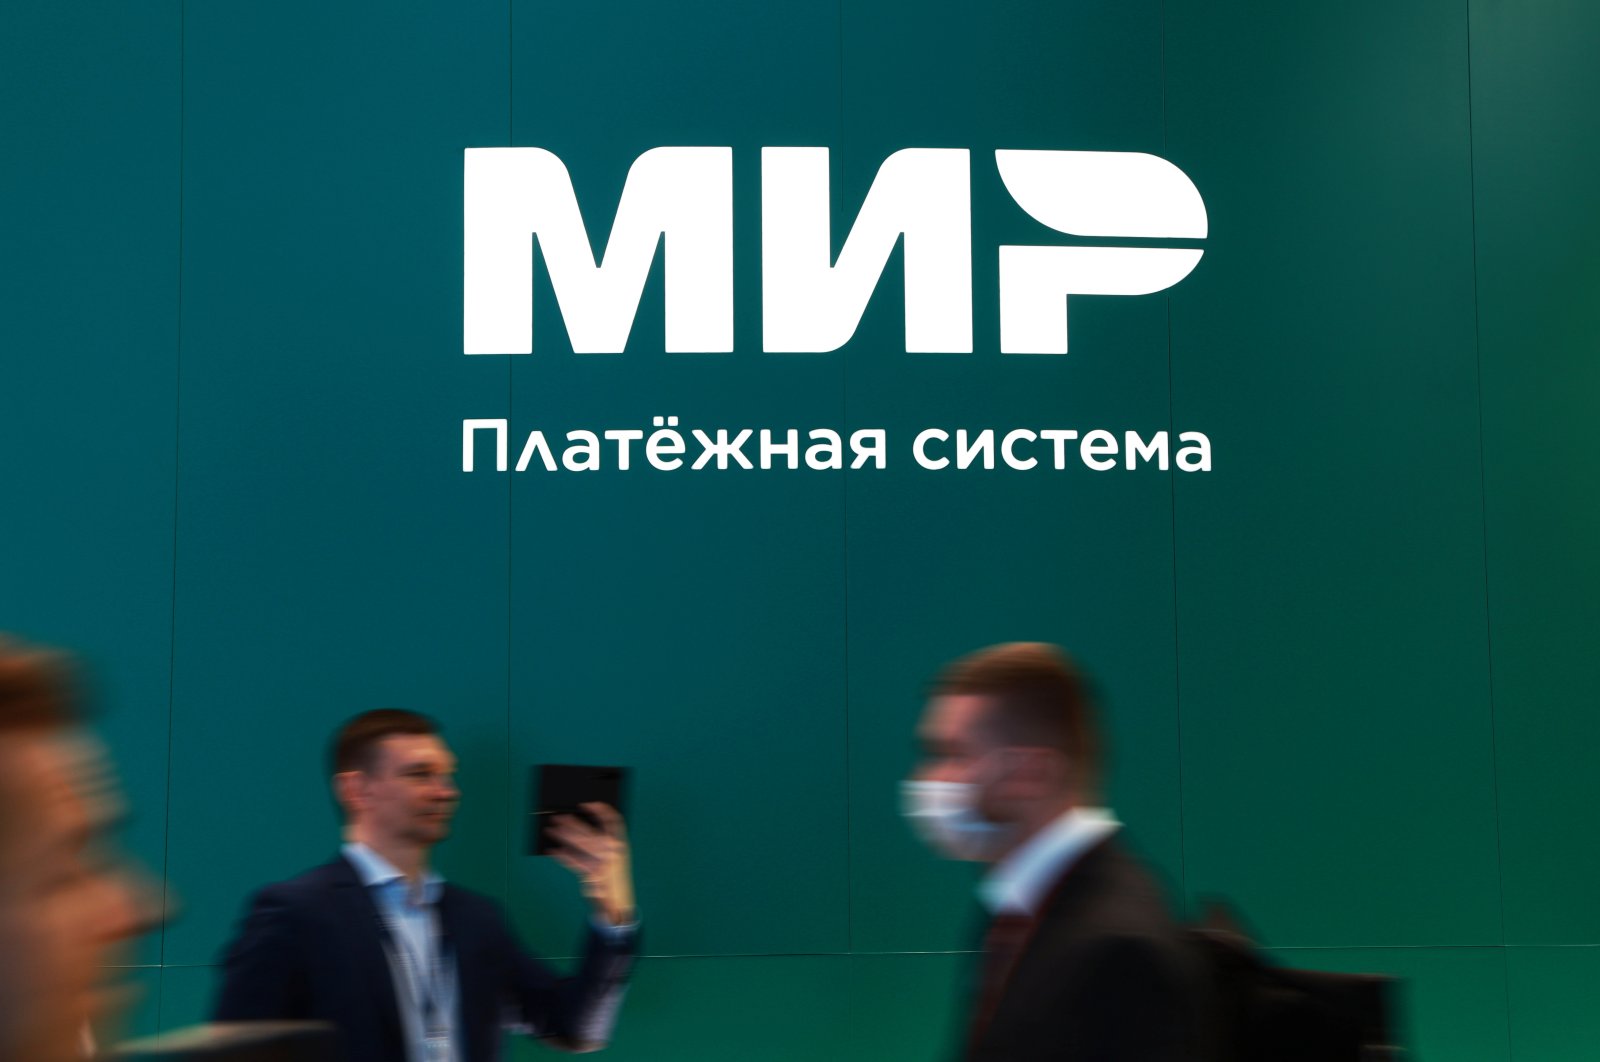 The logo of Russian payment system Mir is seen at the St. Petersburg International Economic Forum (SPIEF) in Saint Petersburg, Russia, June 15, 2022. (Reuters Photo)